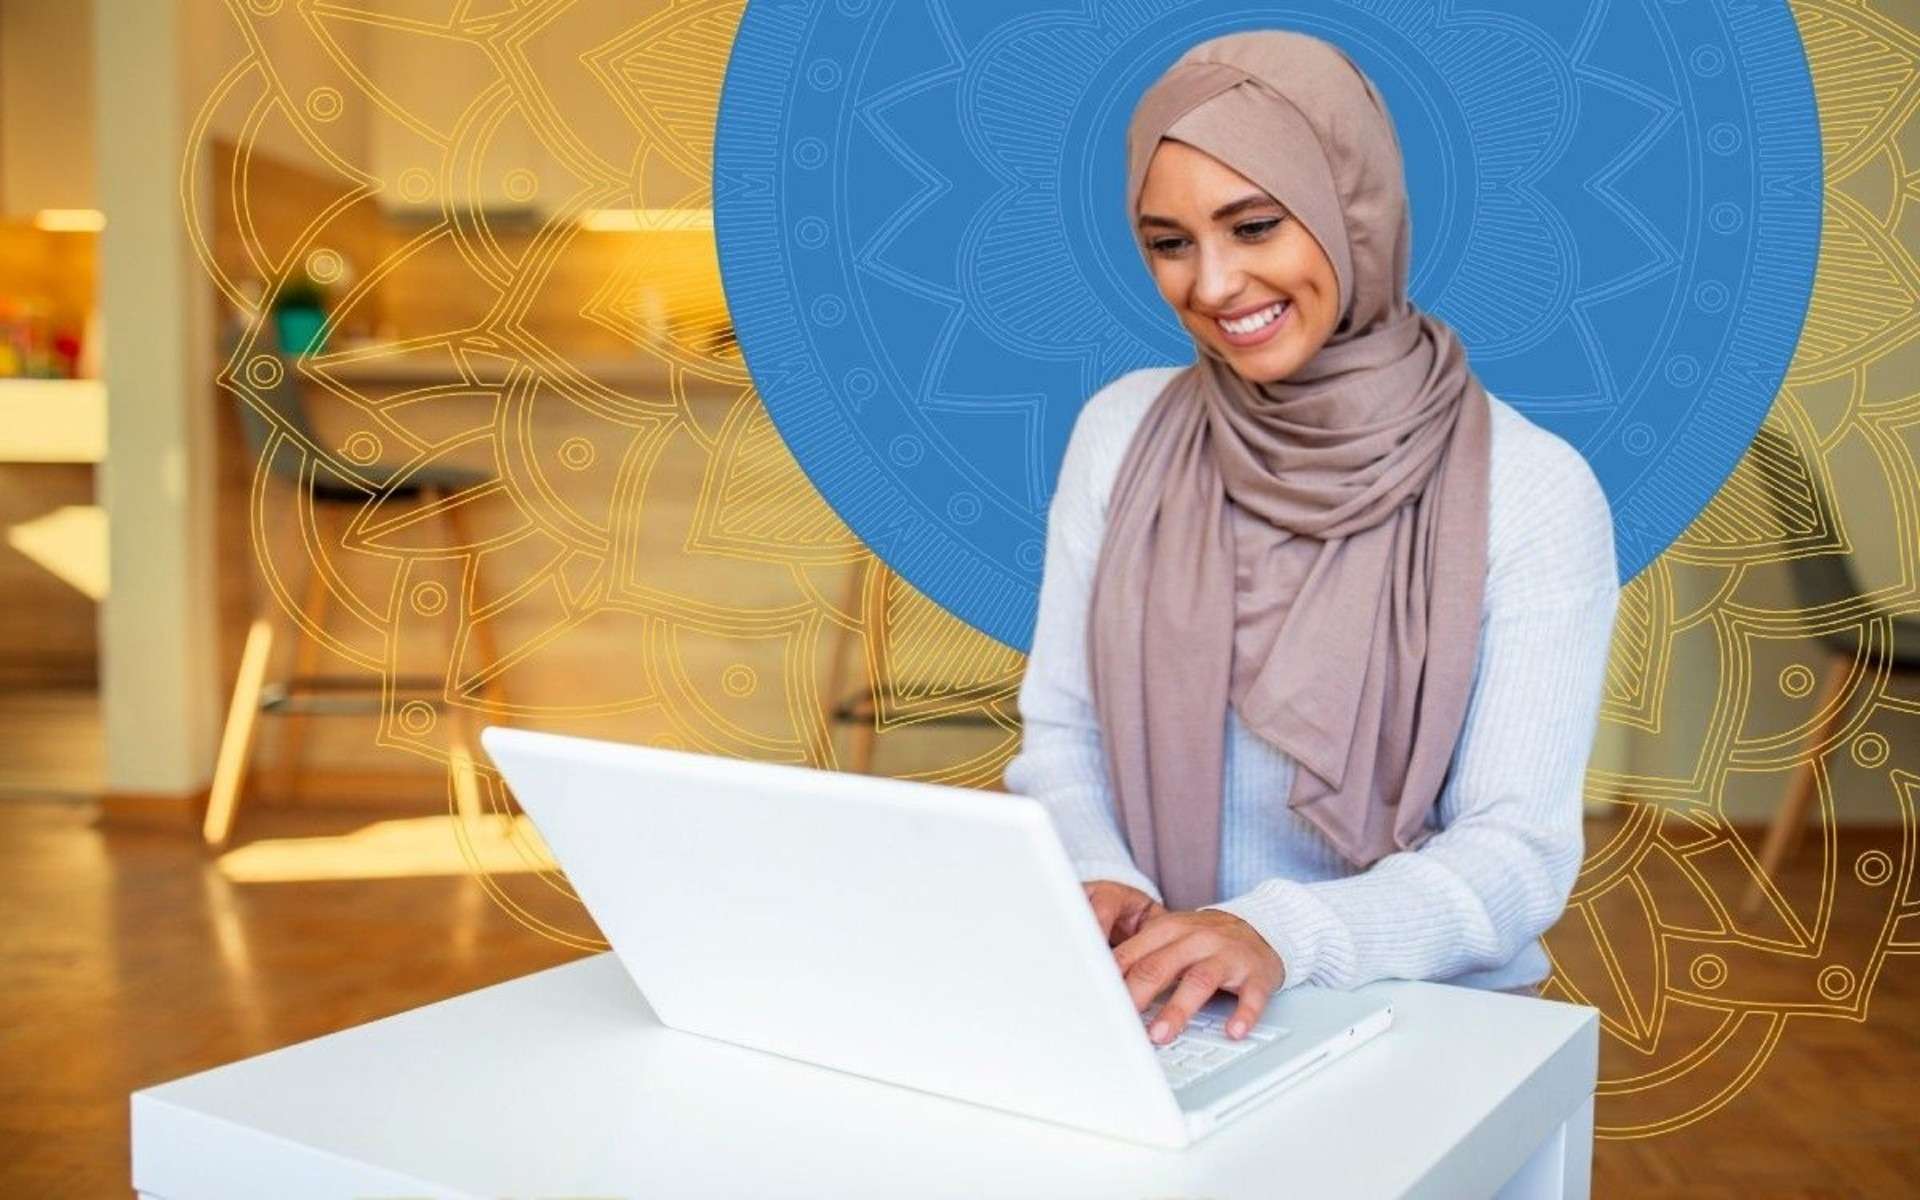 How Online Quran Classes Make a Difference